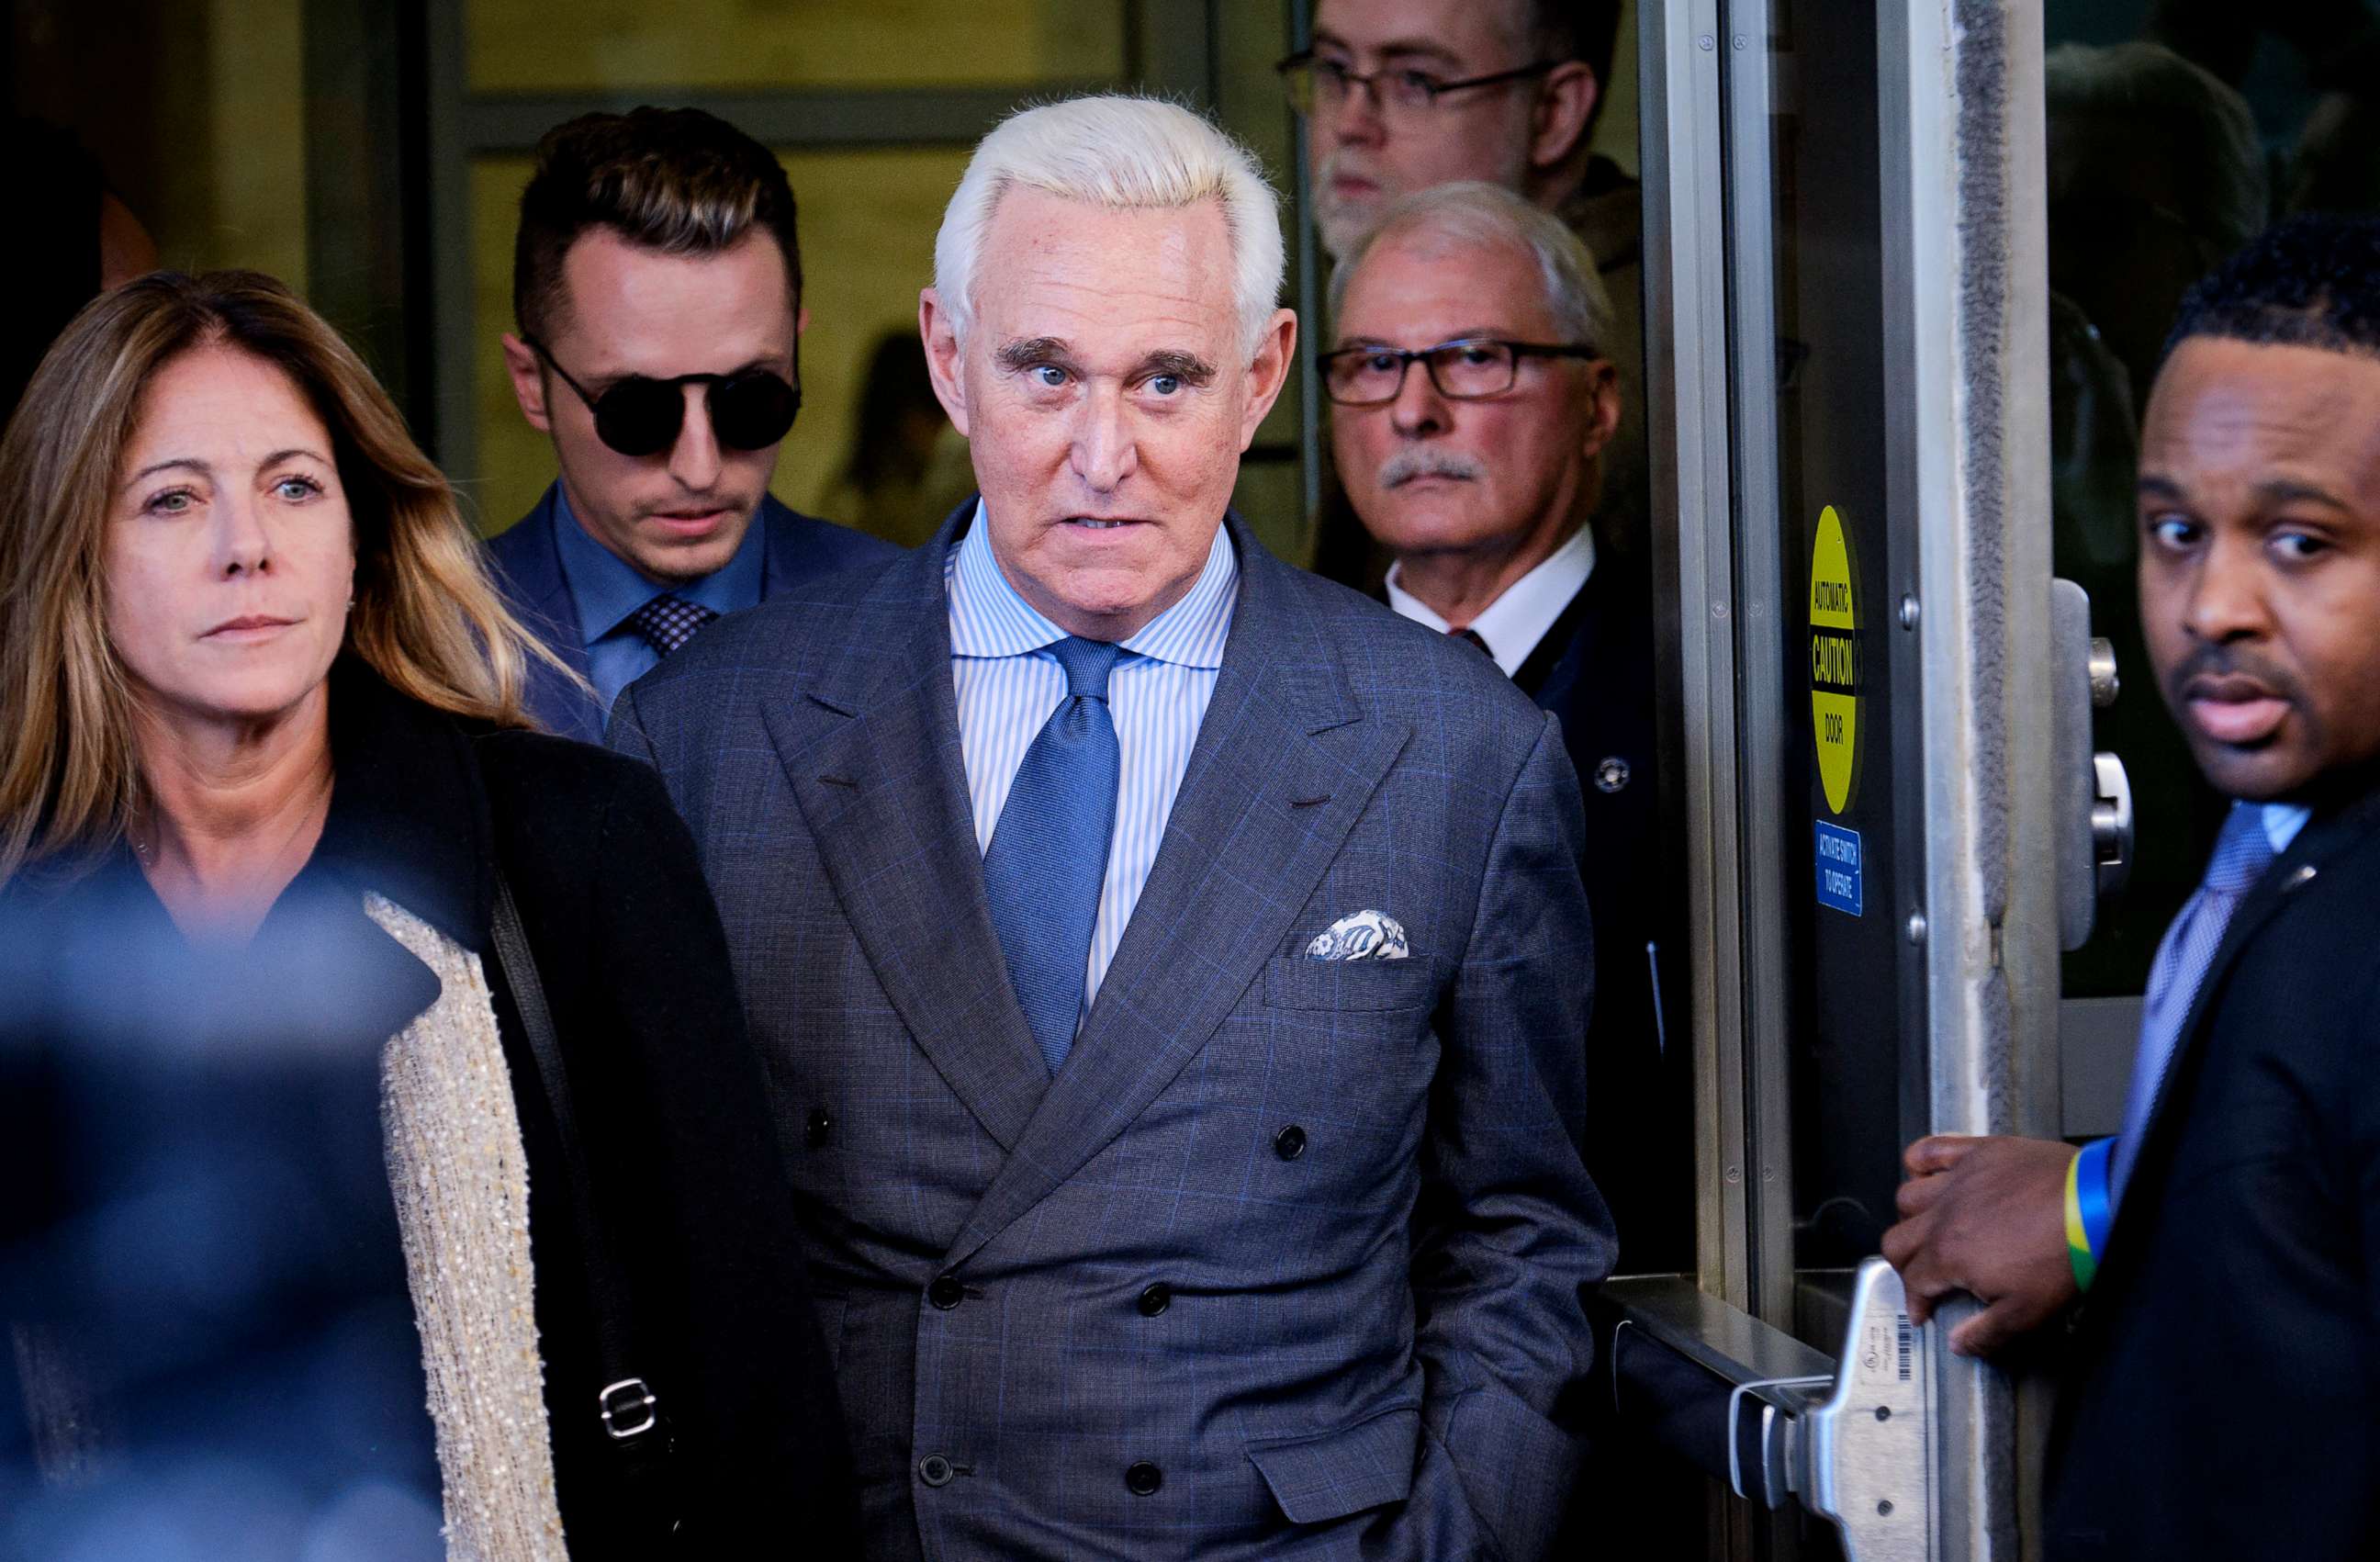 PHOTO: Roger Stone, an associate of President Donald Trump, exits a U.S. District Court House in Washington, Feb. 21, 2019.